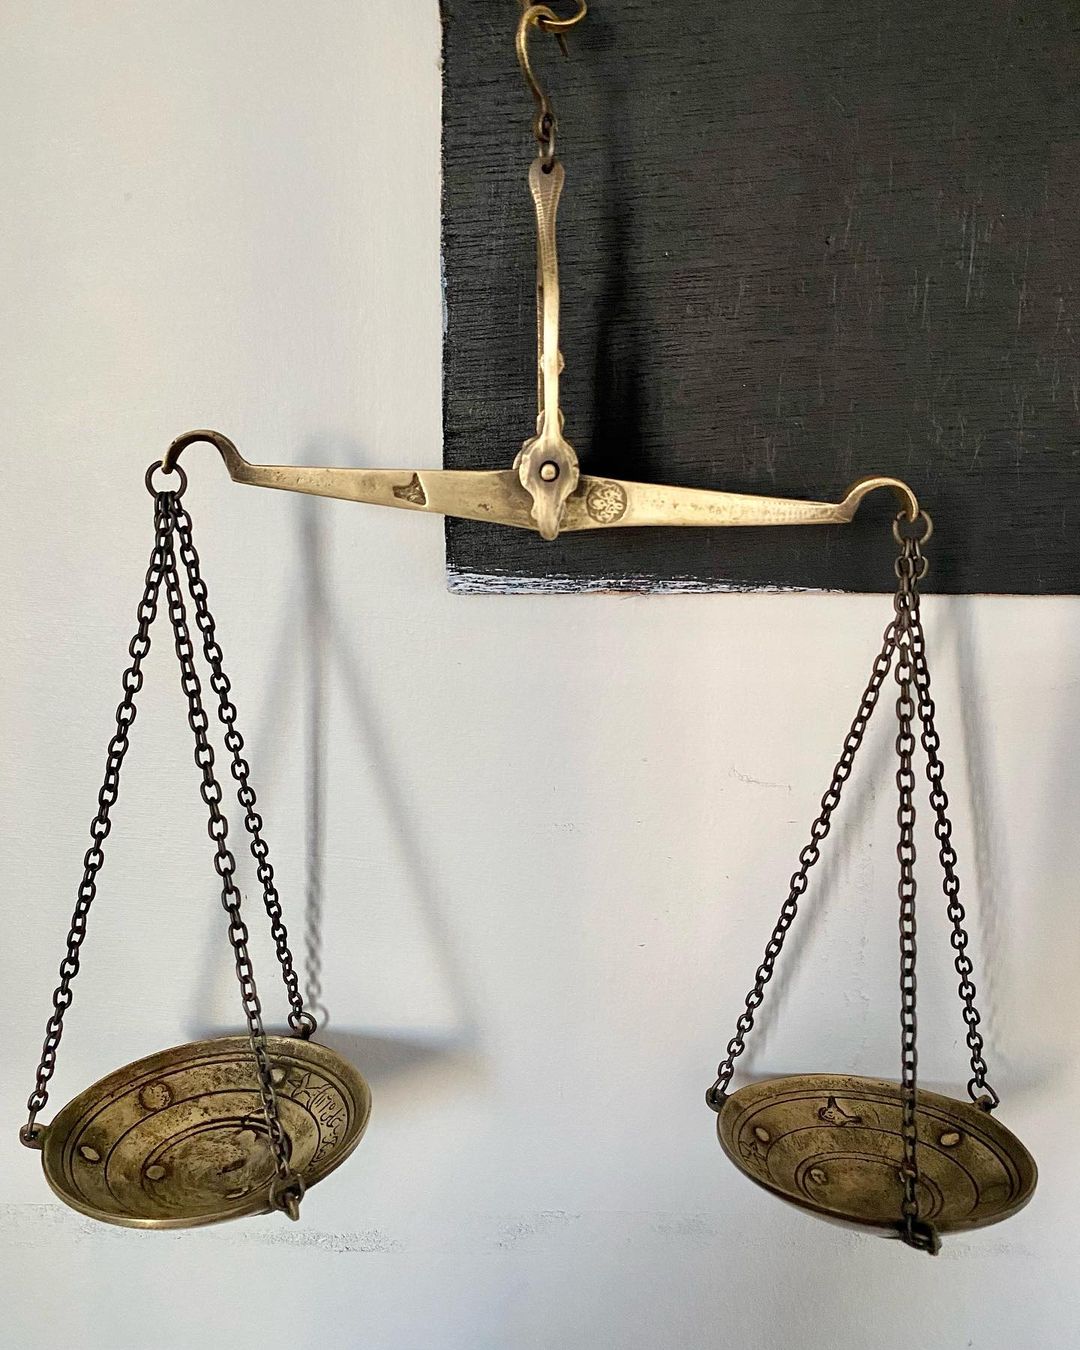 Collectible jeweler's scale made of brass material